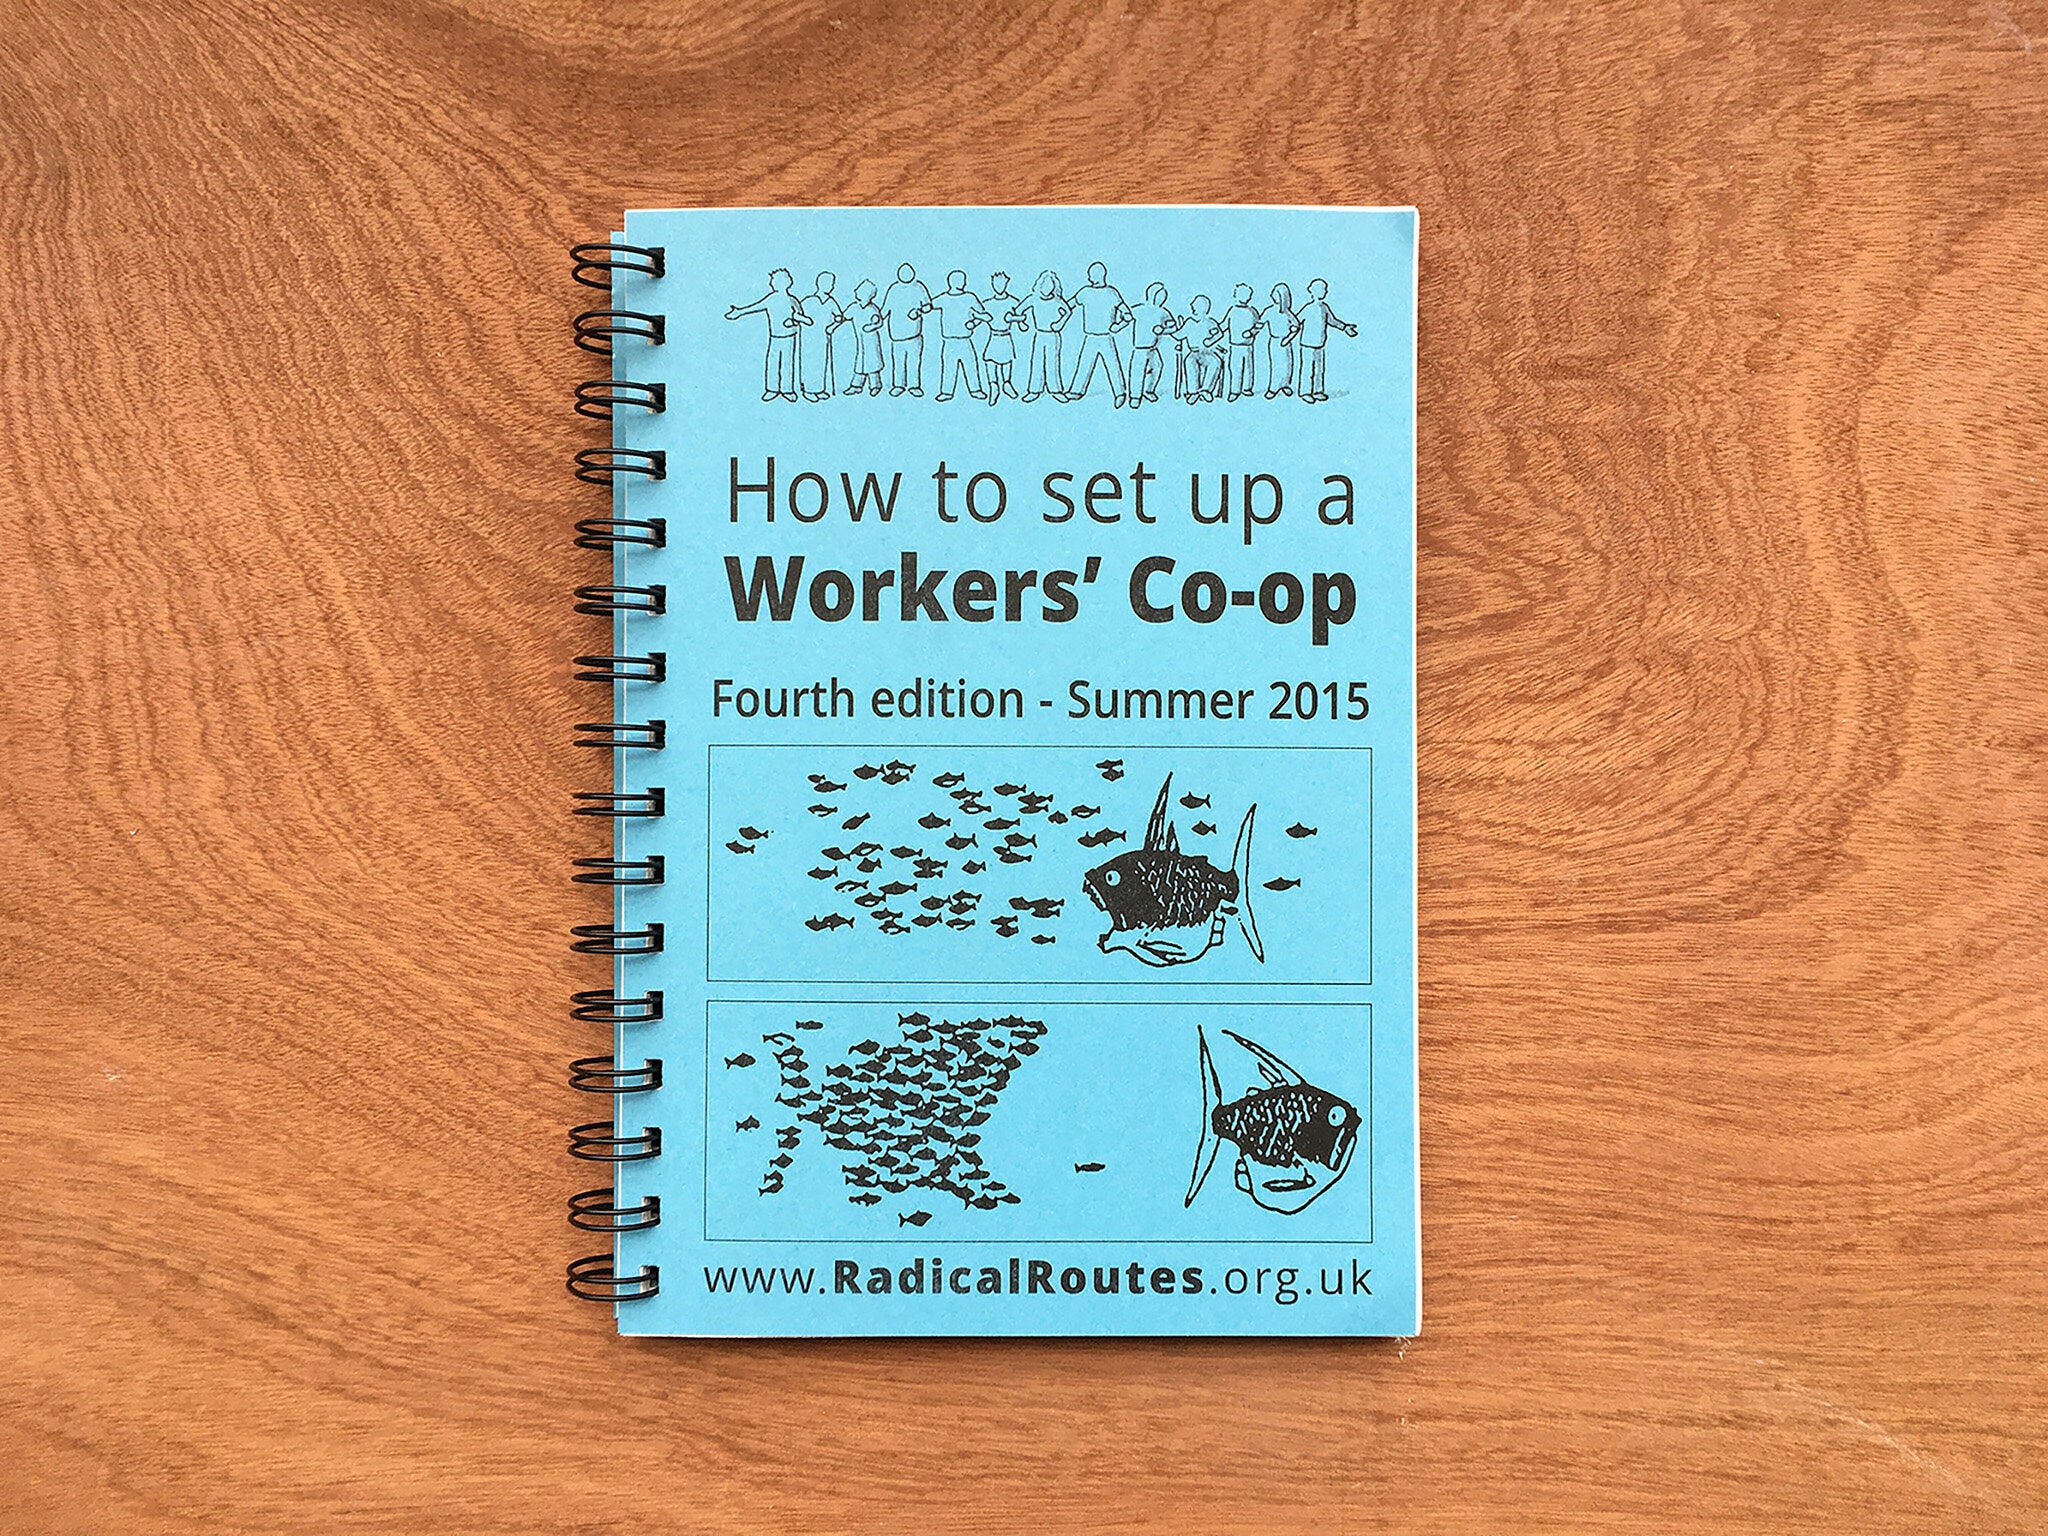 HOW TO SET UP A WORKERS CO-OP